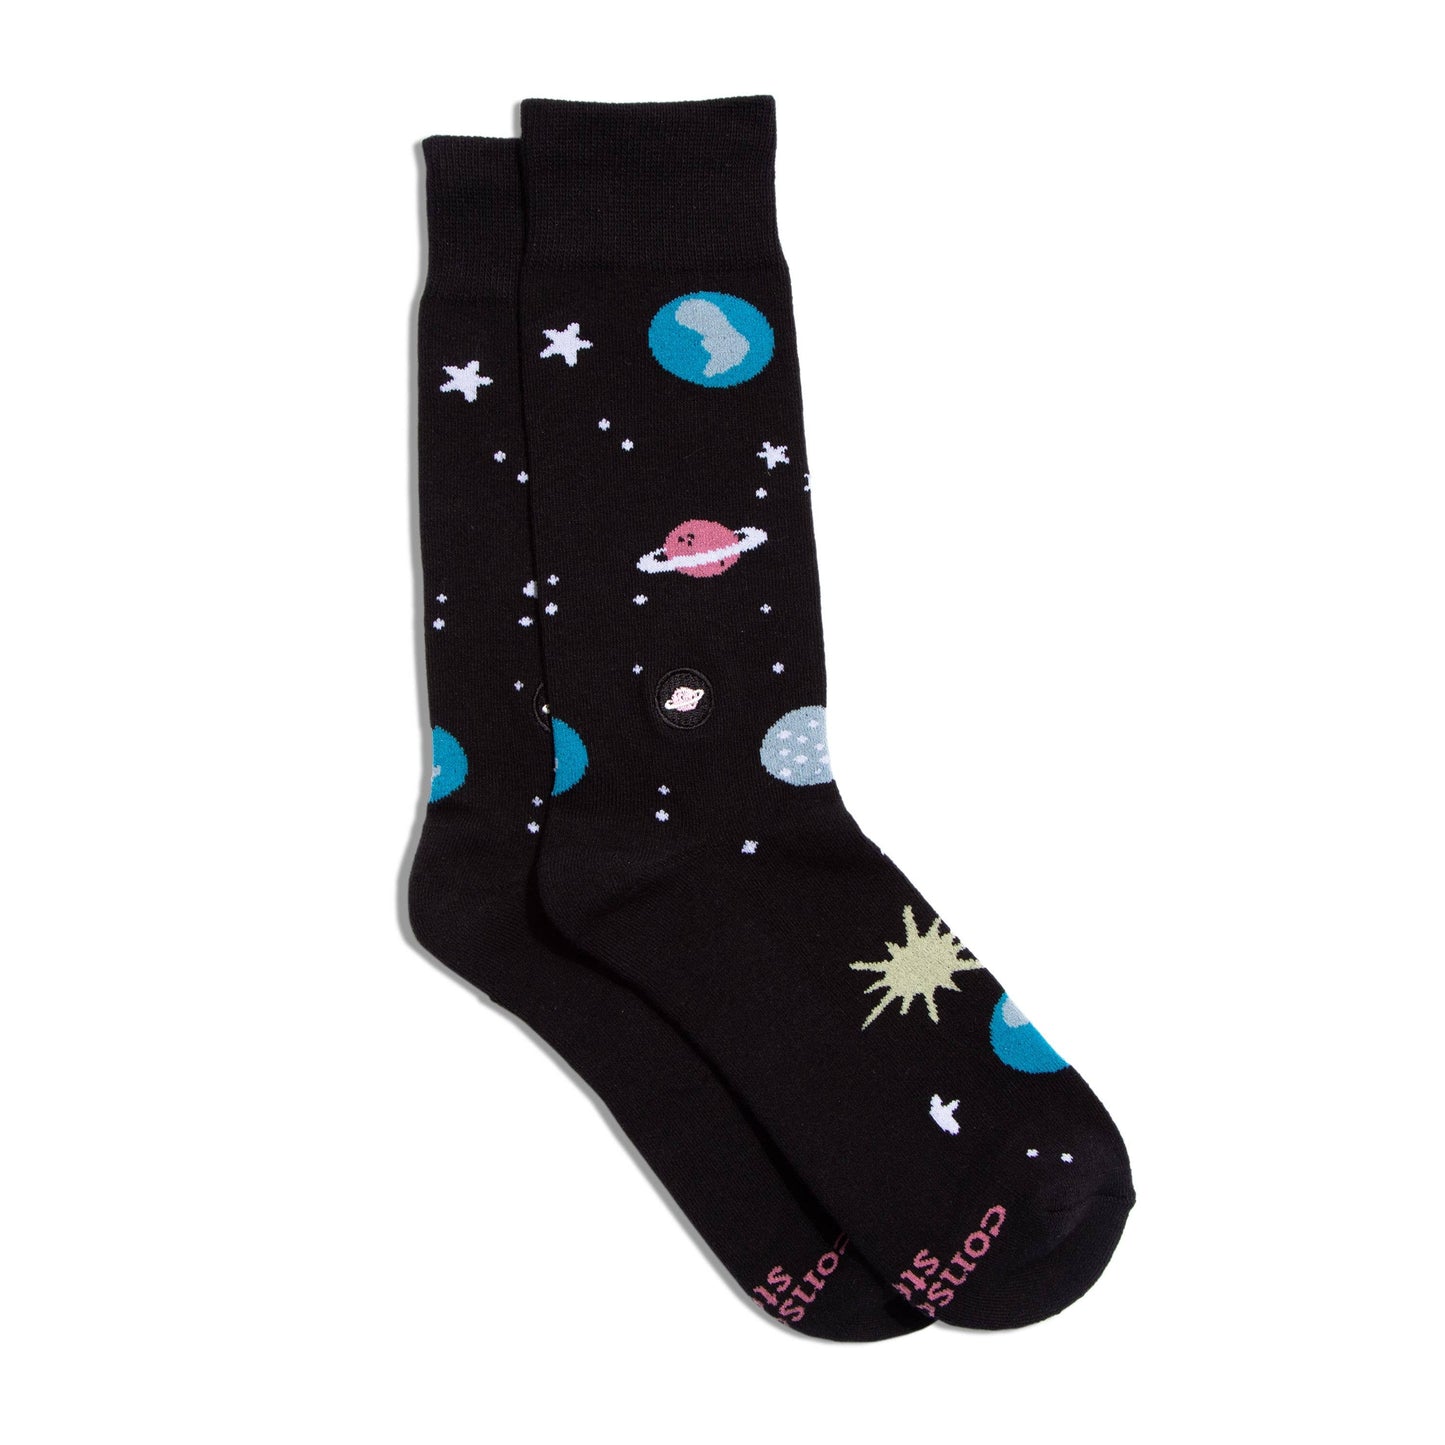 Conscious Step - Socks that Support Space Exploration (Black Galaxy)